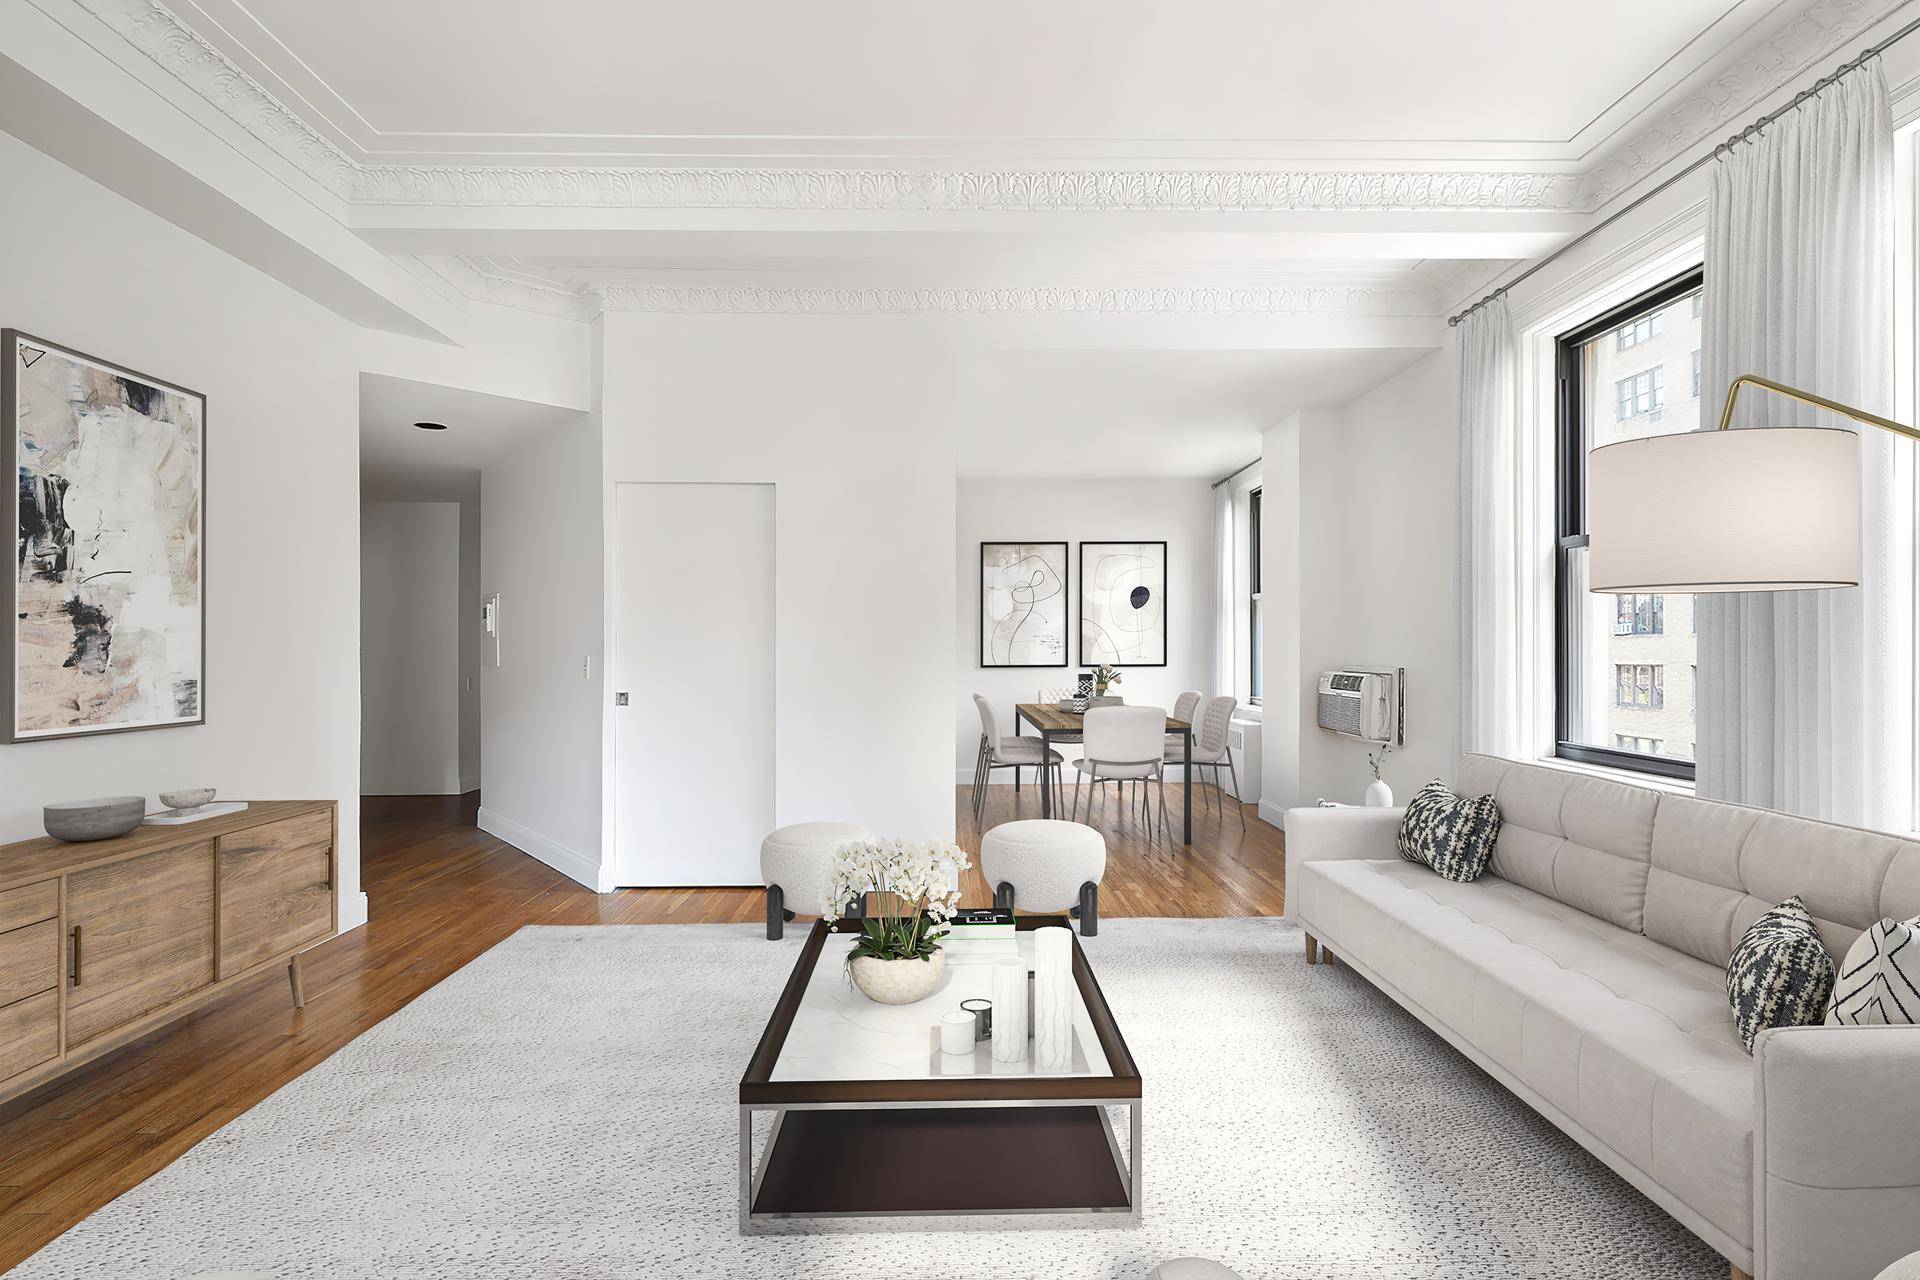 A classic Upper West Side corner 3 bedroom overlooking West End Avenue with stunning prewar detail in an Emery Roth building designed in 1915 with only two units per floor.